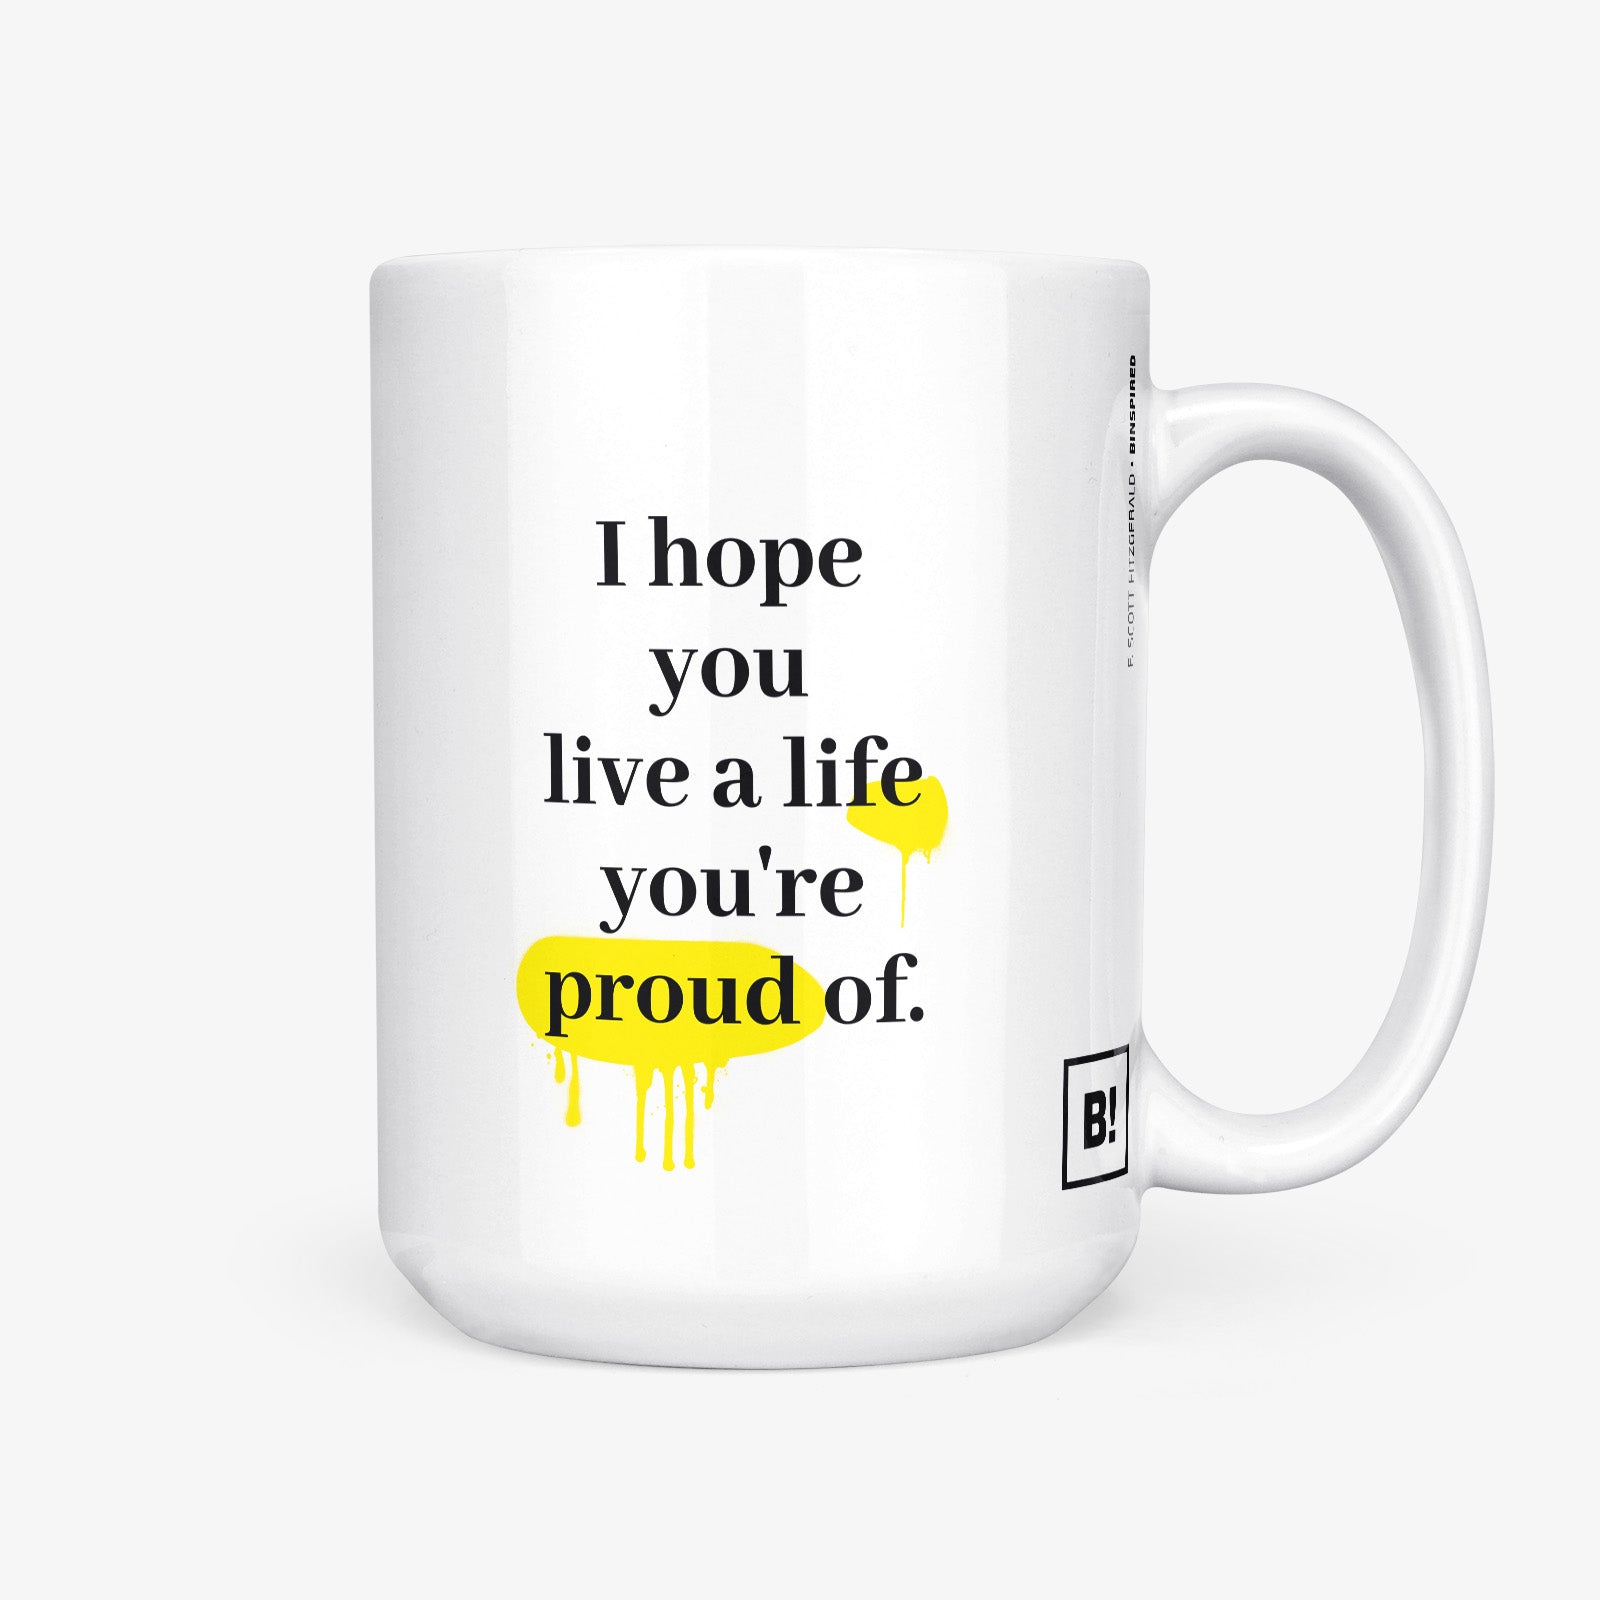 Be inspired by F. Scott Fitzgerald's famous quote, "I hope you live a life you're proud of" on this white and glossy 15oz coffee mug with the handle on the right.